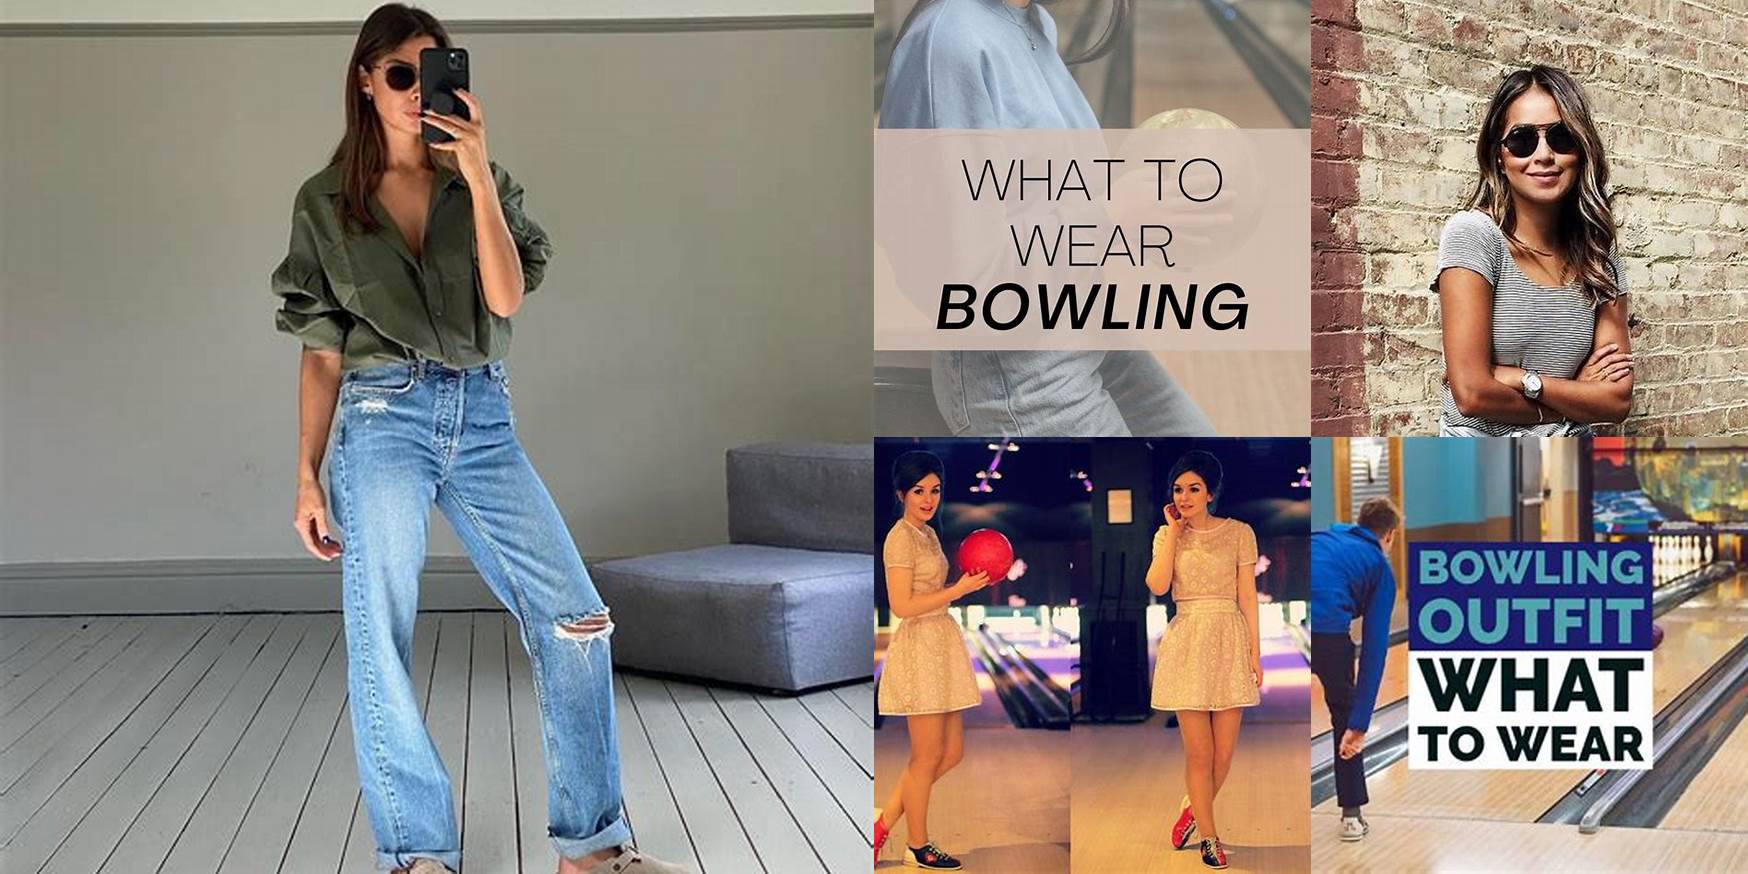 How To Dress For Bowling